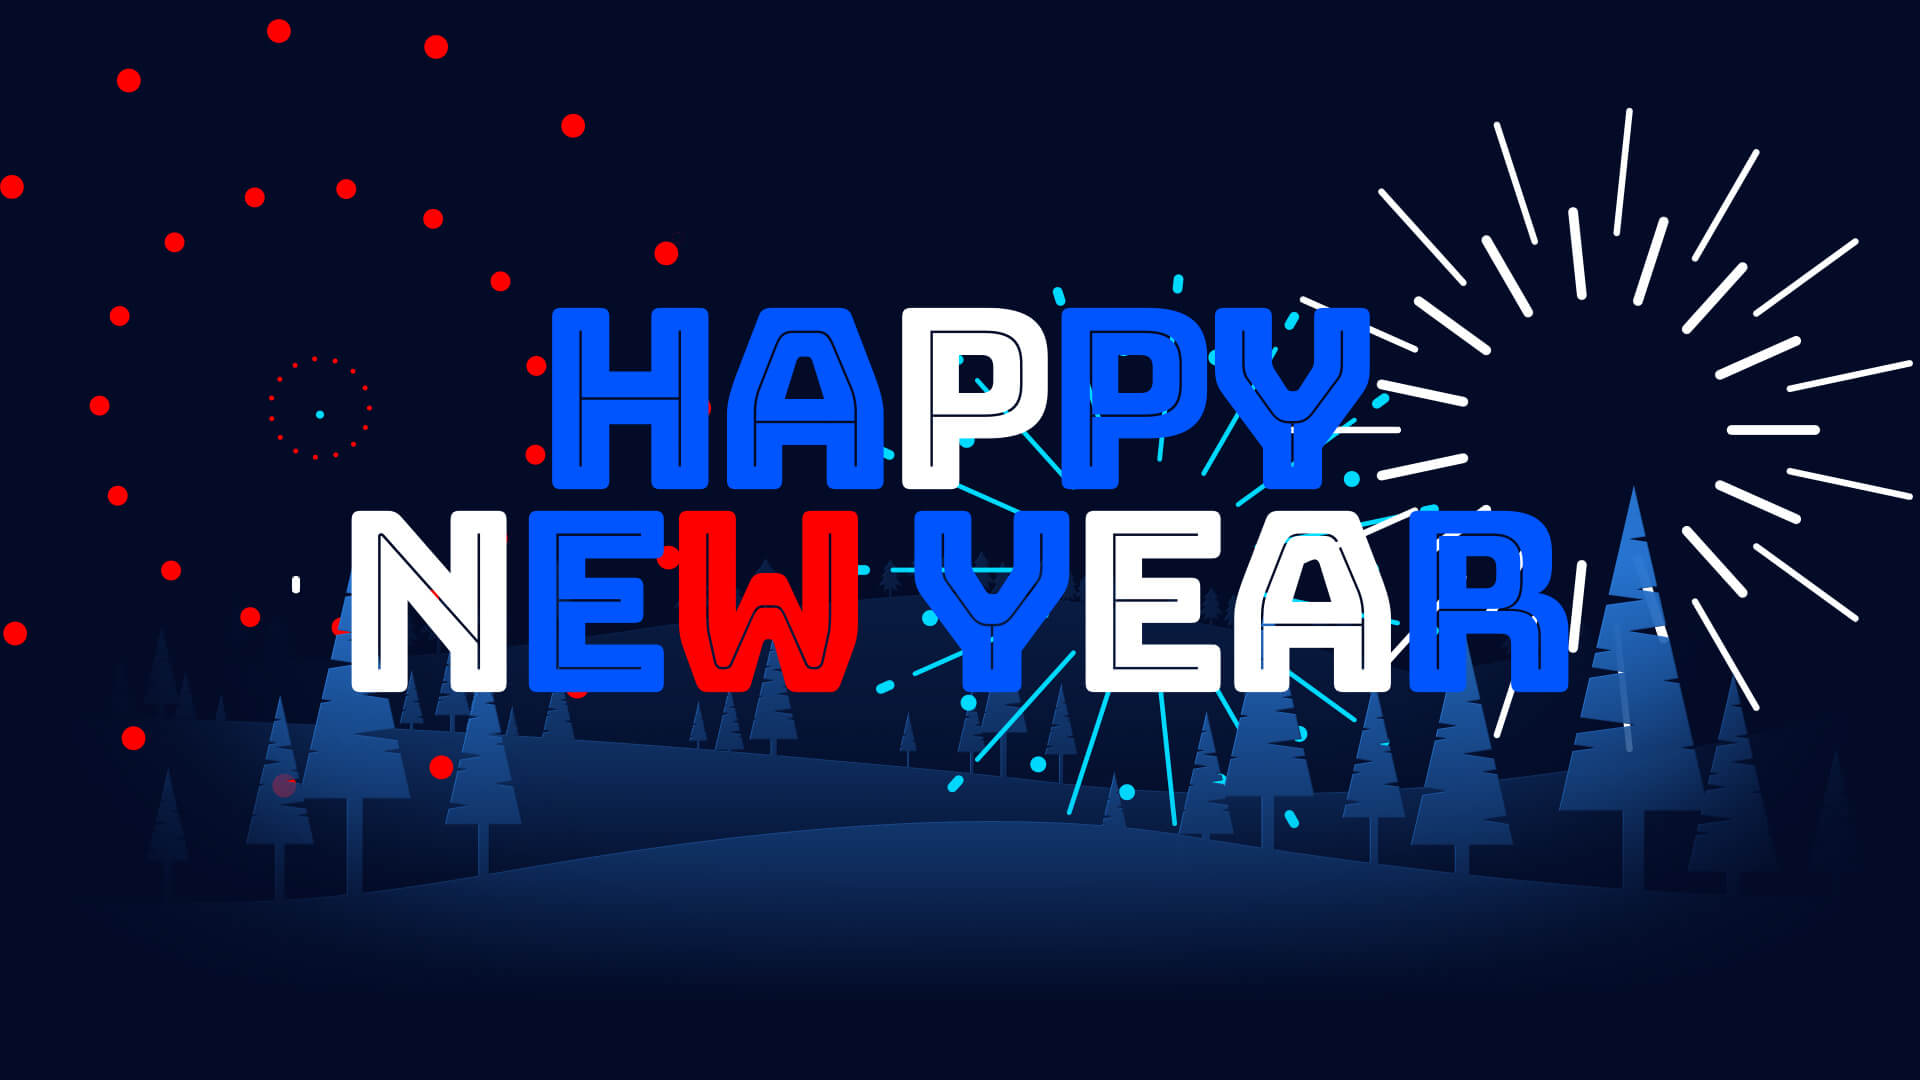 Happy New Year 2021 Animated Fireworks Title Animations